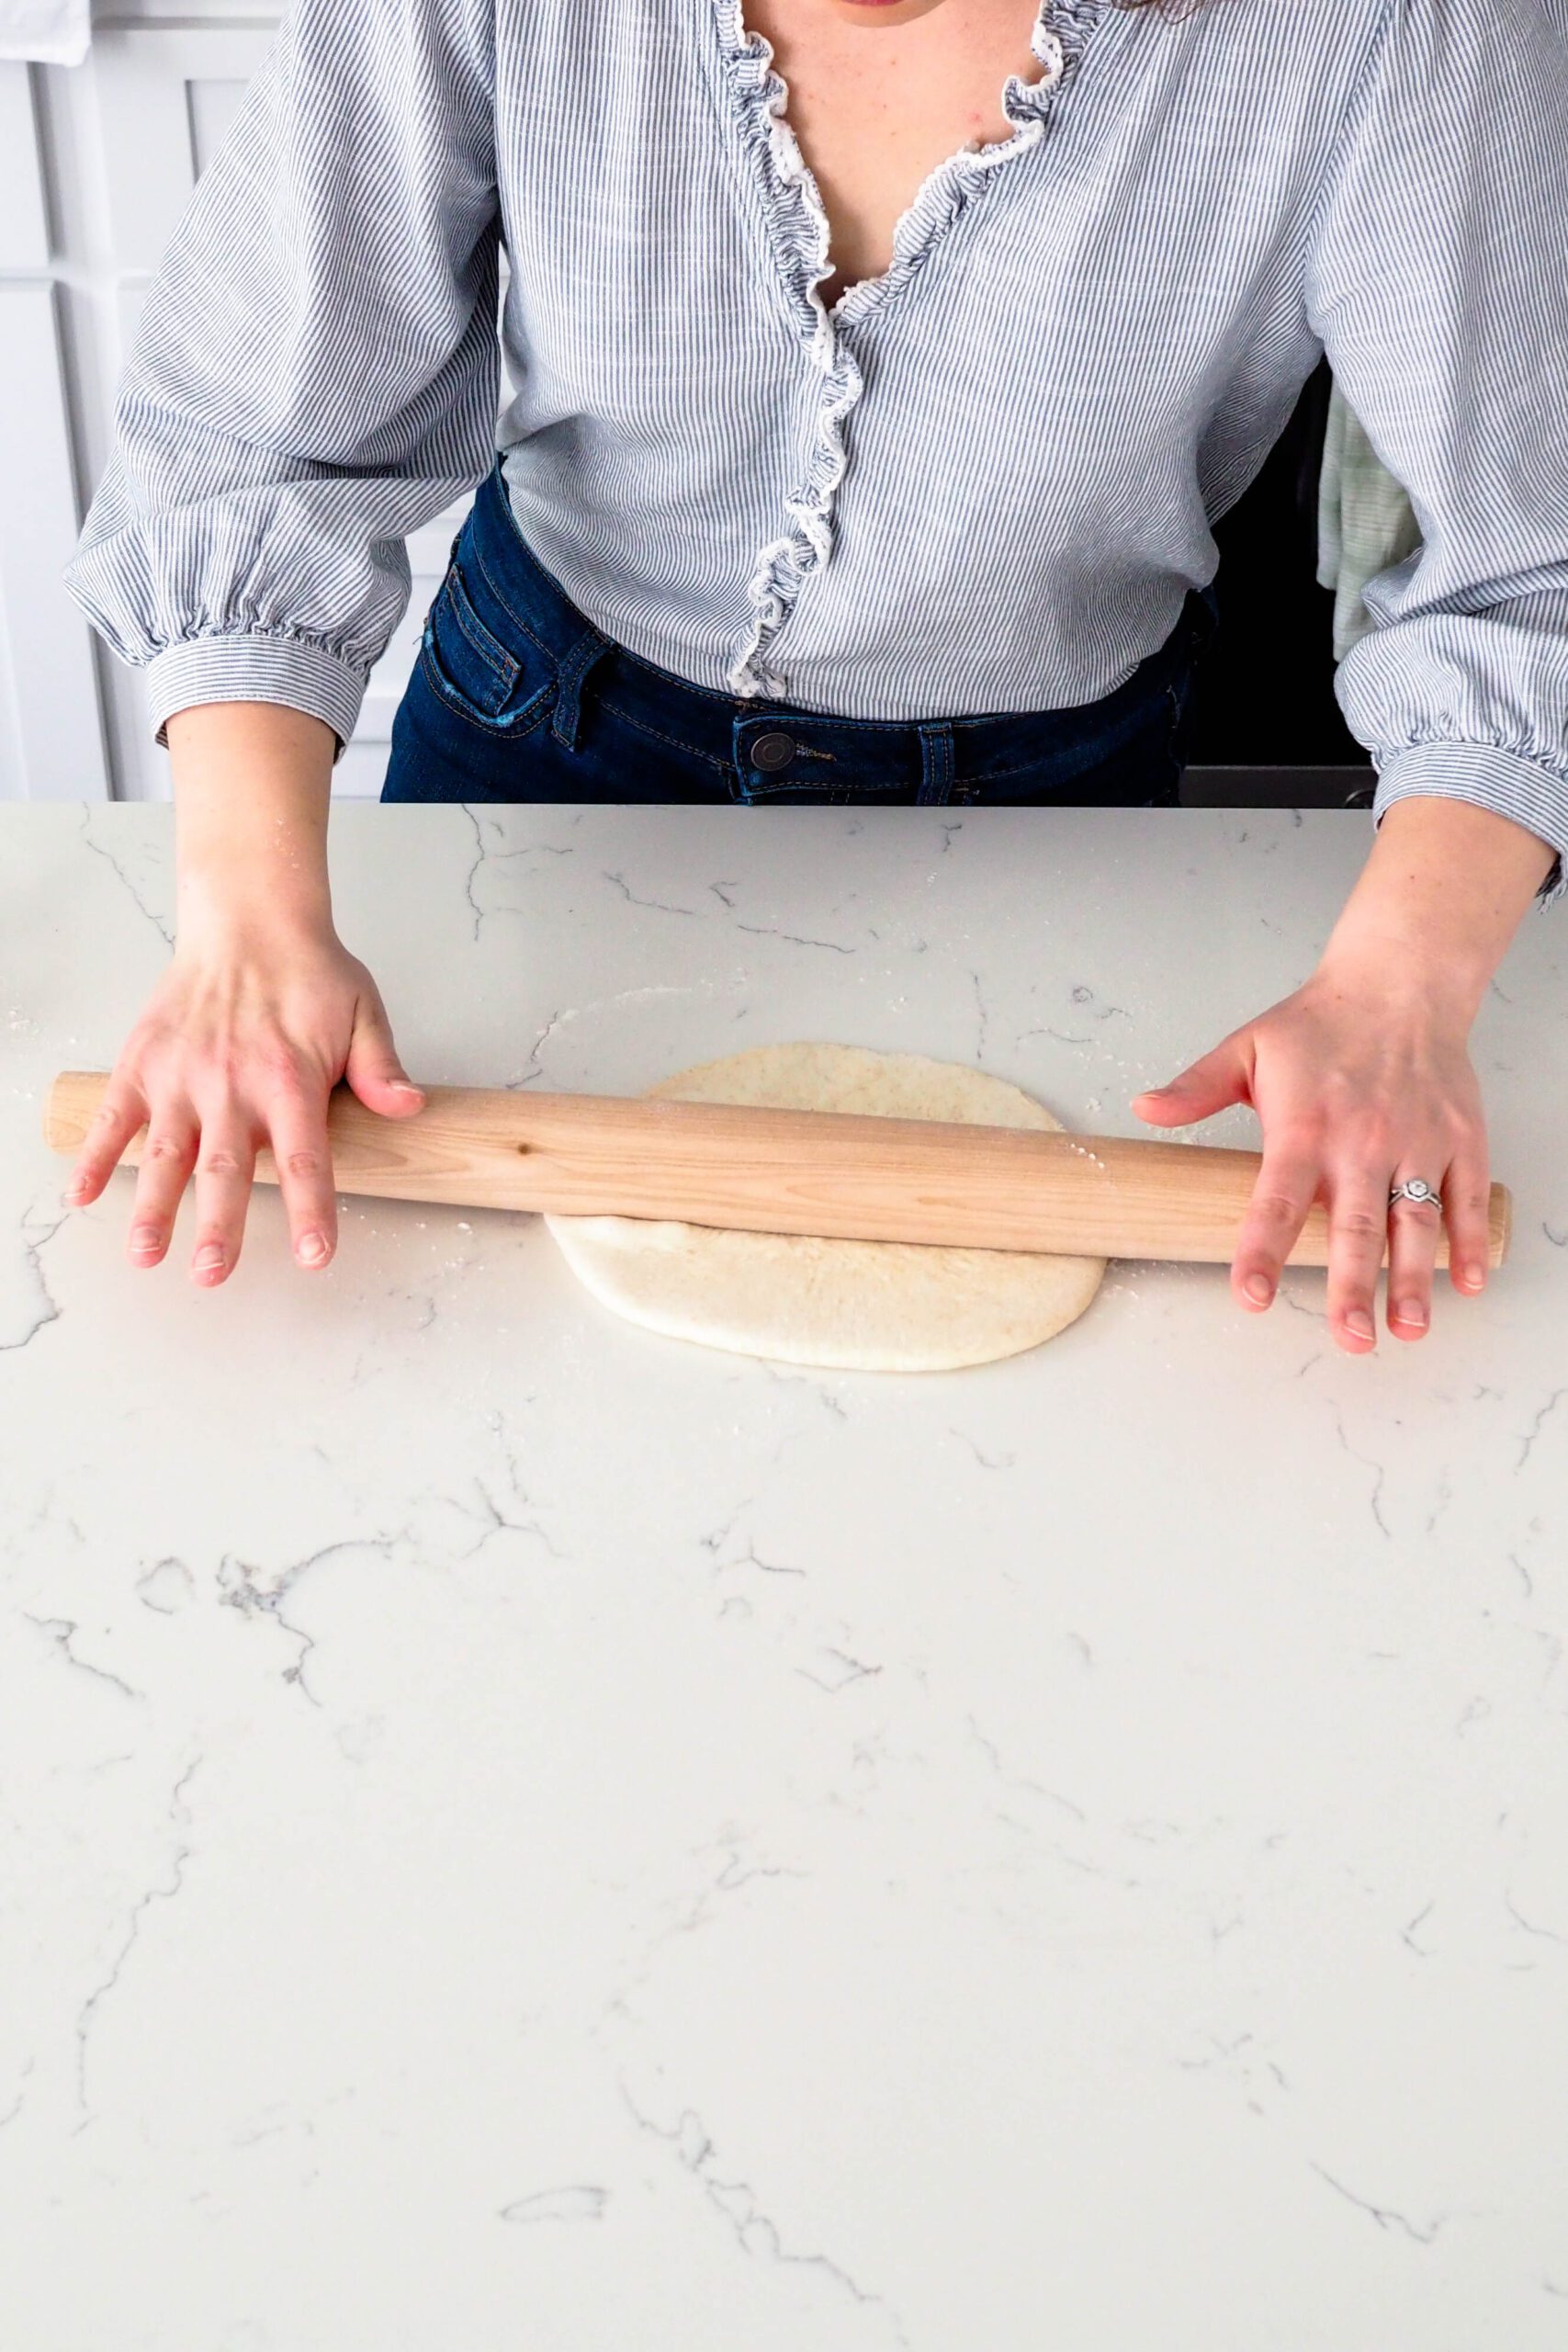 Two hands roll out a round of thin crust pizza dough.